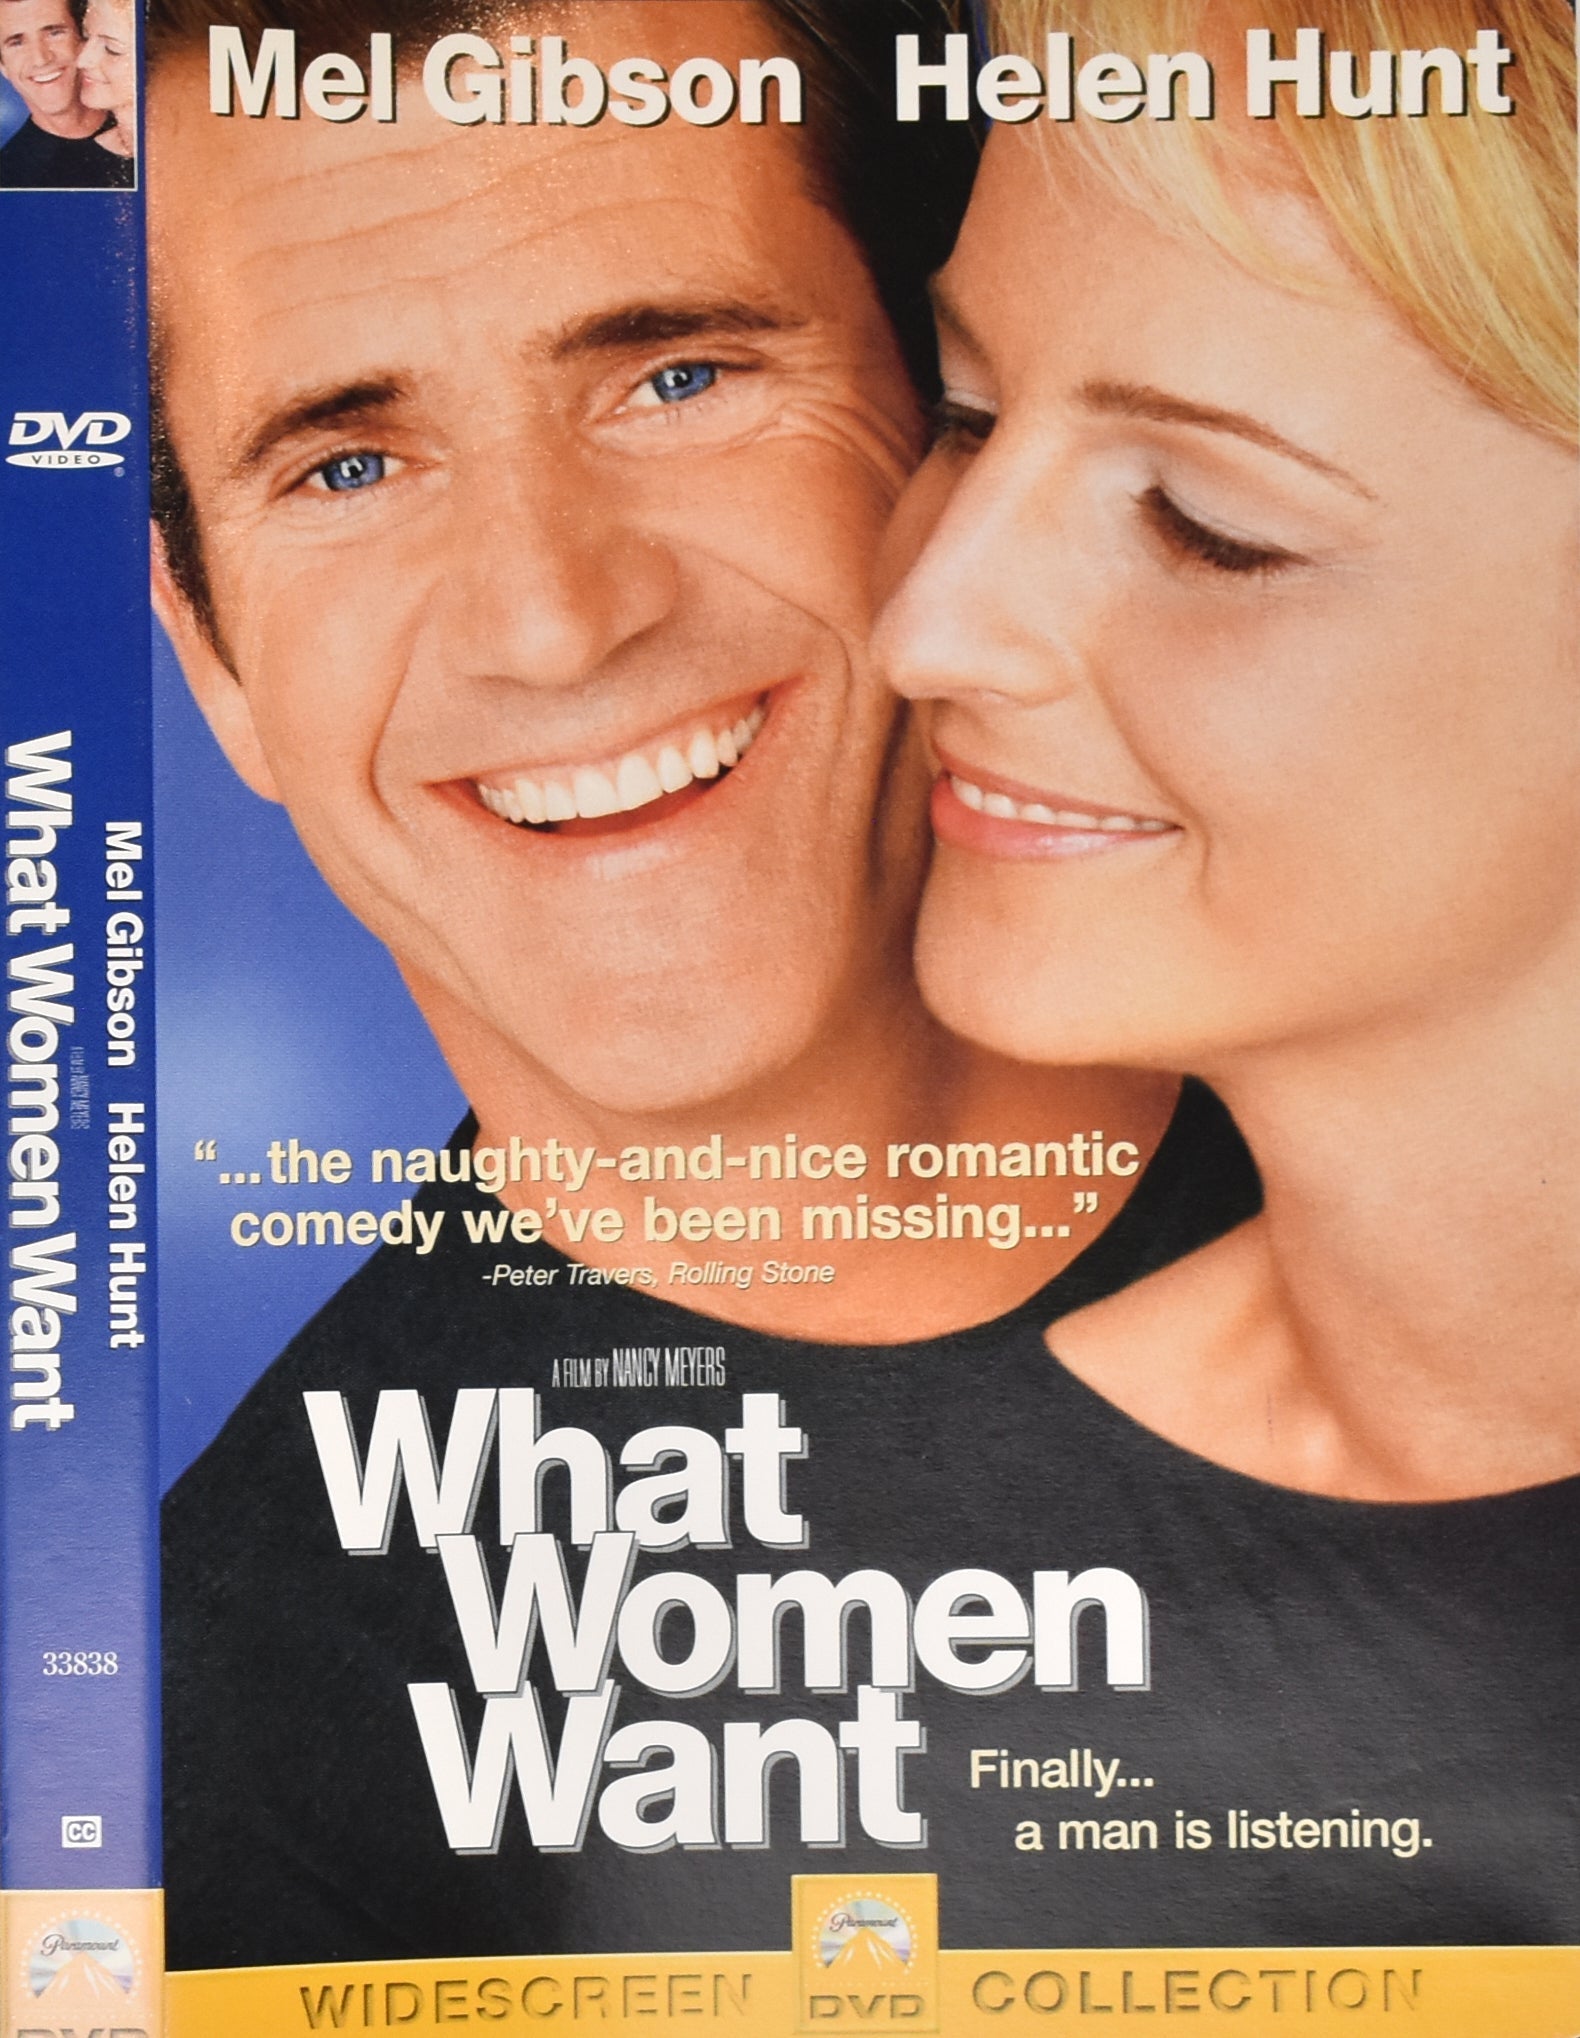 What Women Want Dvd Movie Used Mel Gibson